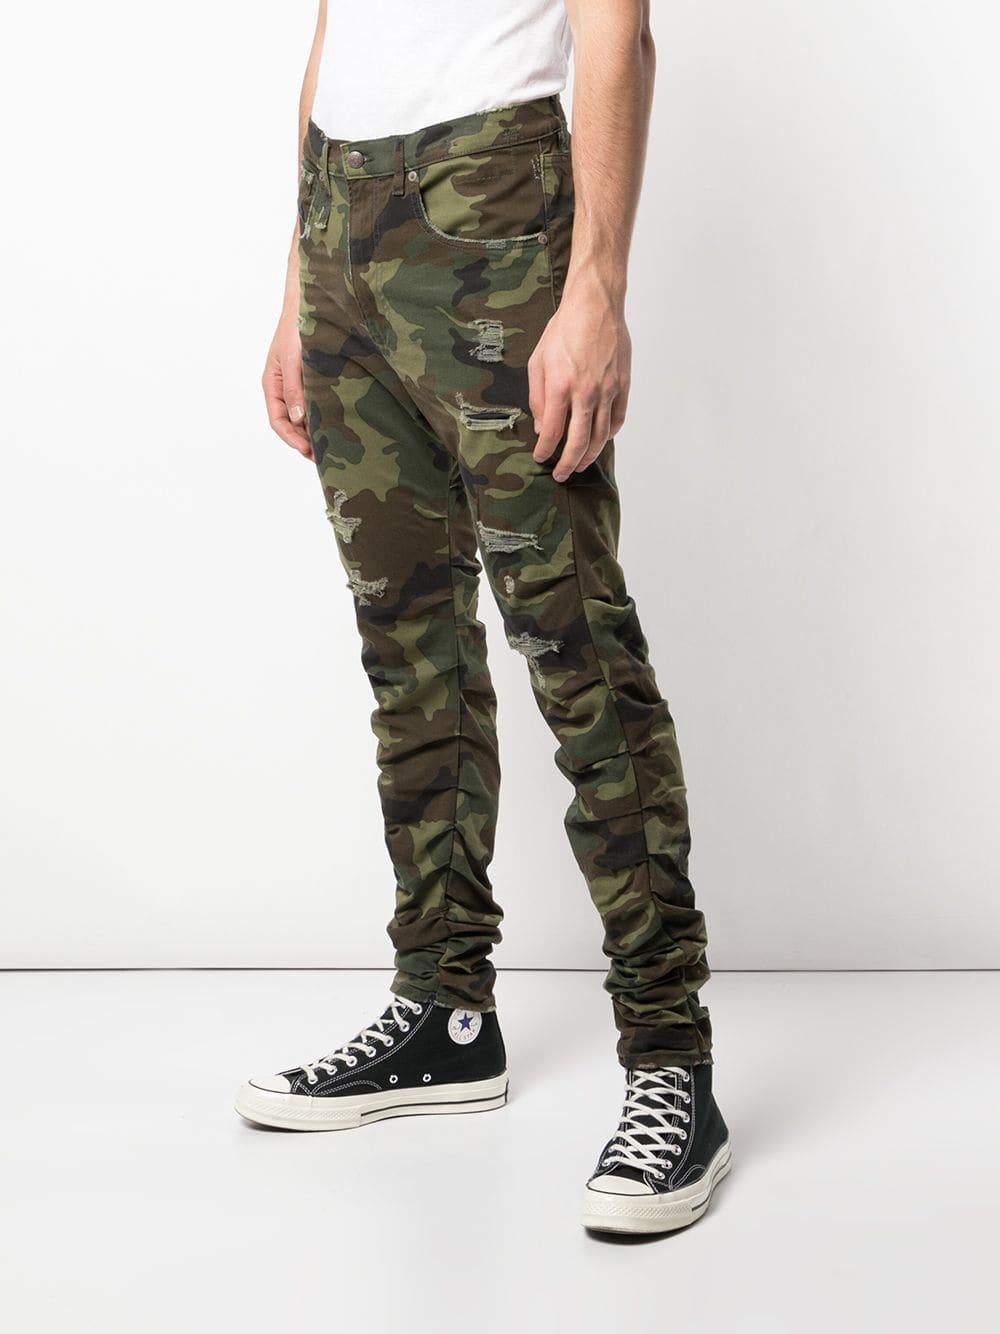 R13 Denim Camouflage Ripped Jeans in Green for Men - Lyst